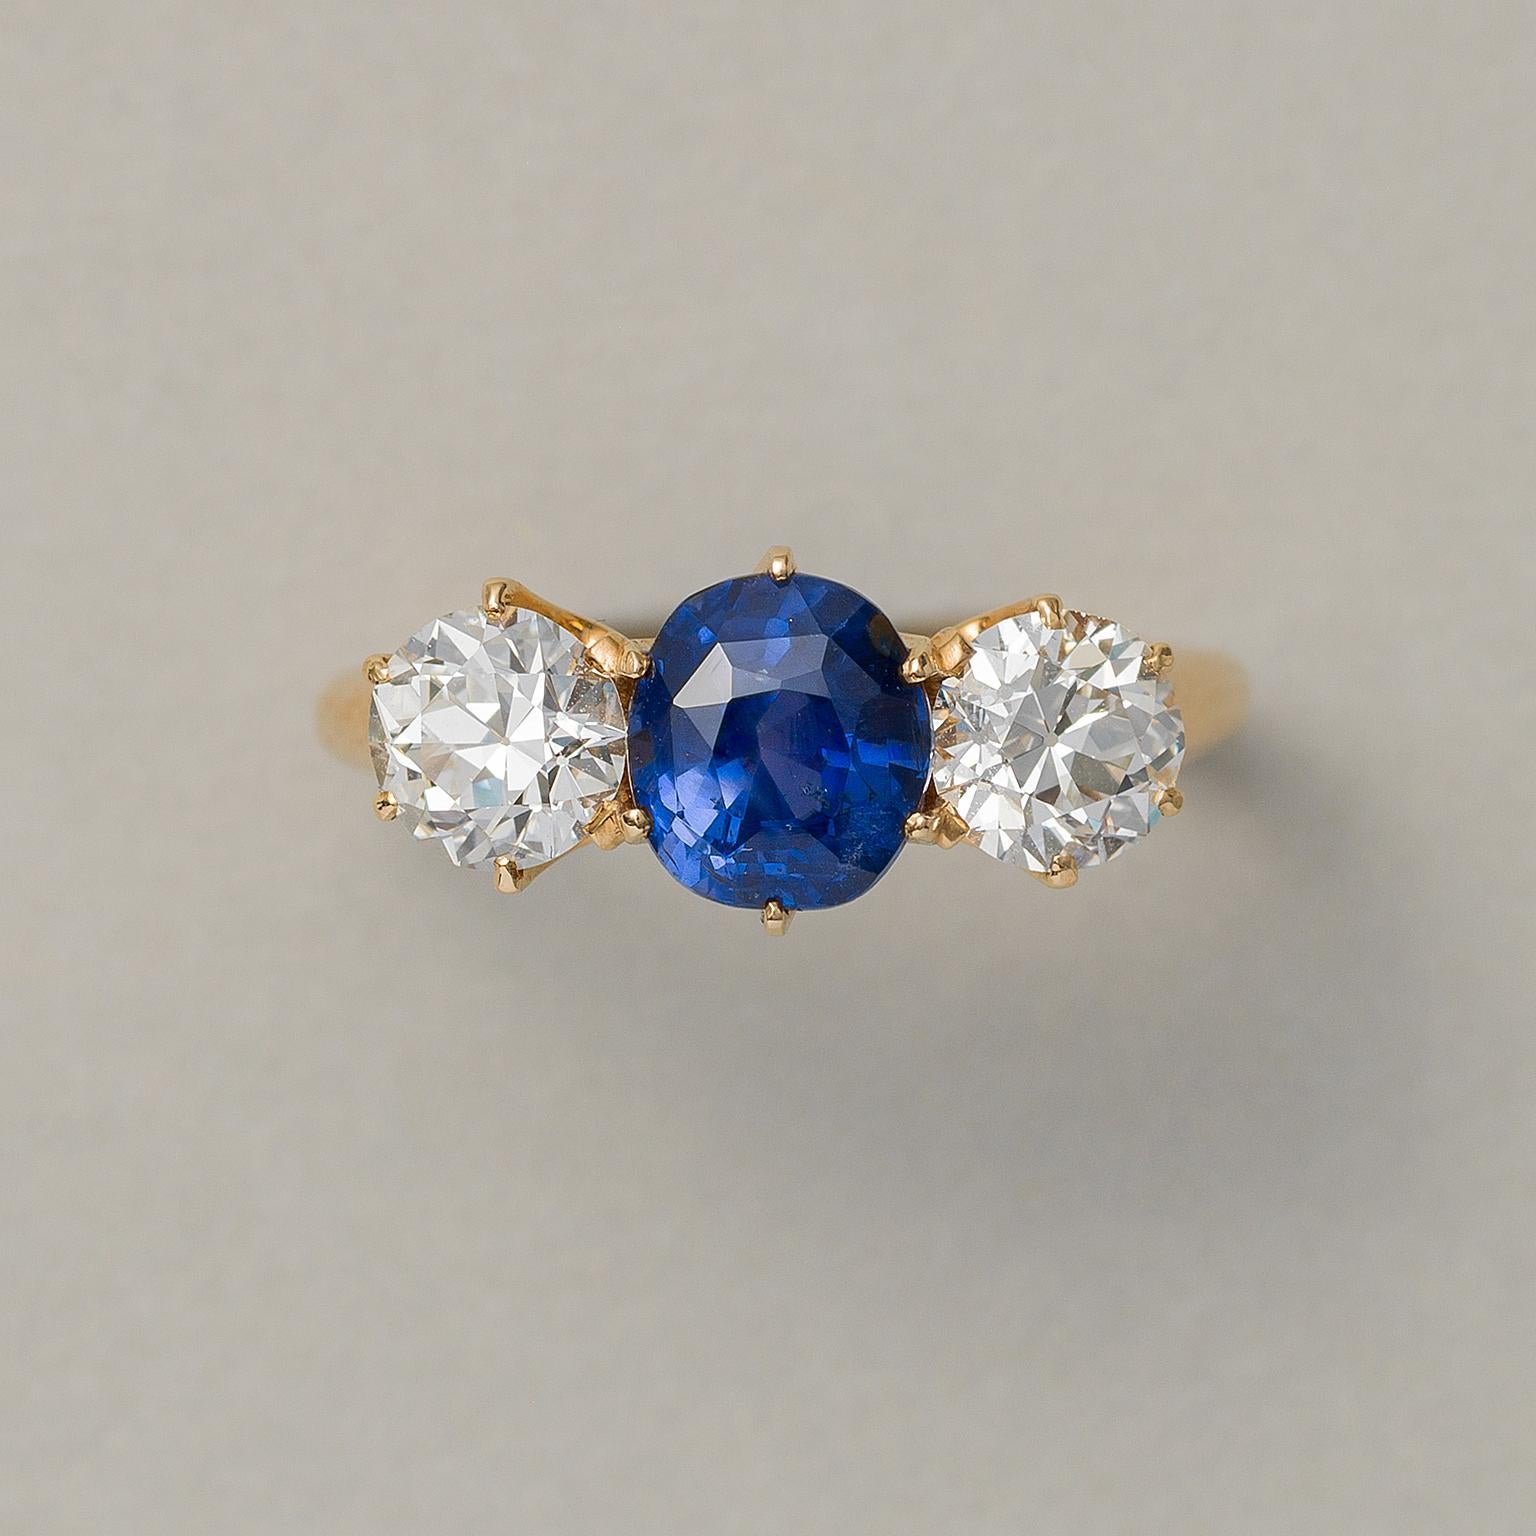 A beautiful 18 carat gold three-stone ring with two European cut diamonds (app. 0.80 carat in total F-G, VS) and in the middle one cushion cut natural non-heated Ceylon sapphire (2.63 carat, 7.6 x 6.7 x 5.6 mm), set in prongs settings, signed and